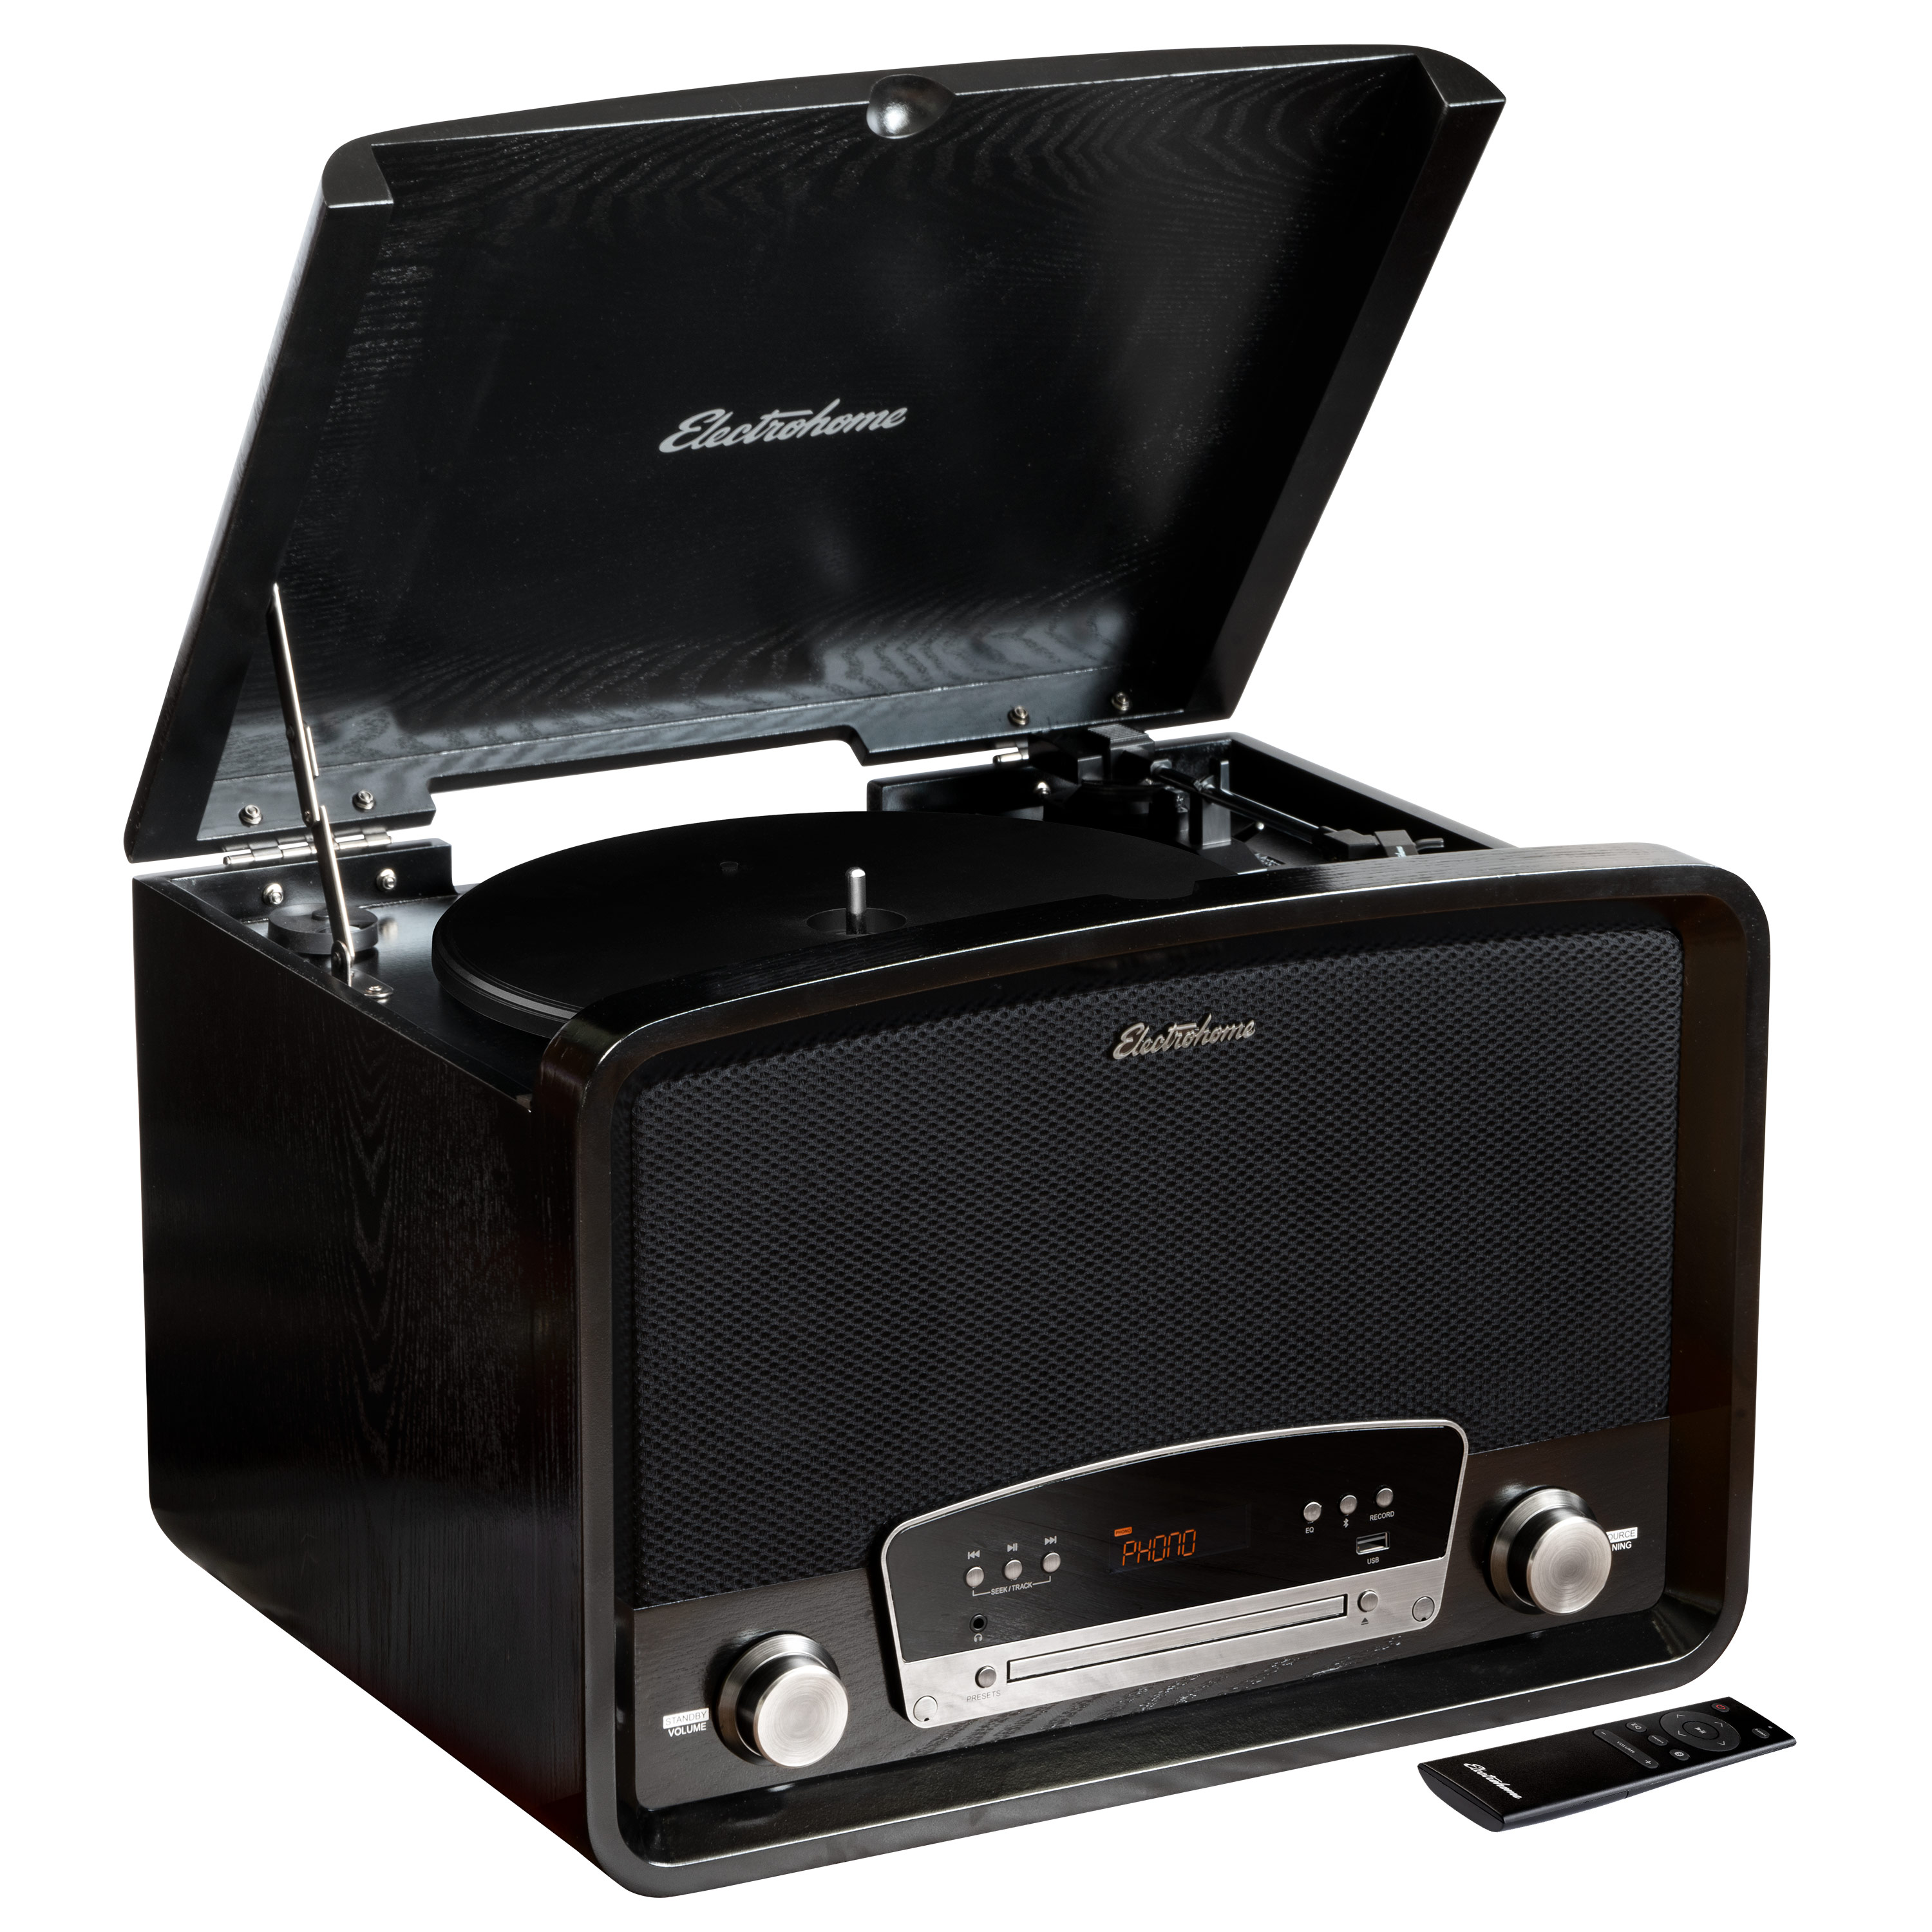 Electrohome Kingston 7-in-1 Vintage Vinyl Record Player Stereo System with 3-Speed Turntable, Bluetooth, AM/FM Radio, CD, Aux In, RCA/Headphone Out, Vinyl/CD to MP3 Recording & USB Playback (RR75B) - image 1 of 9